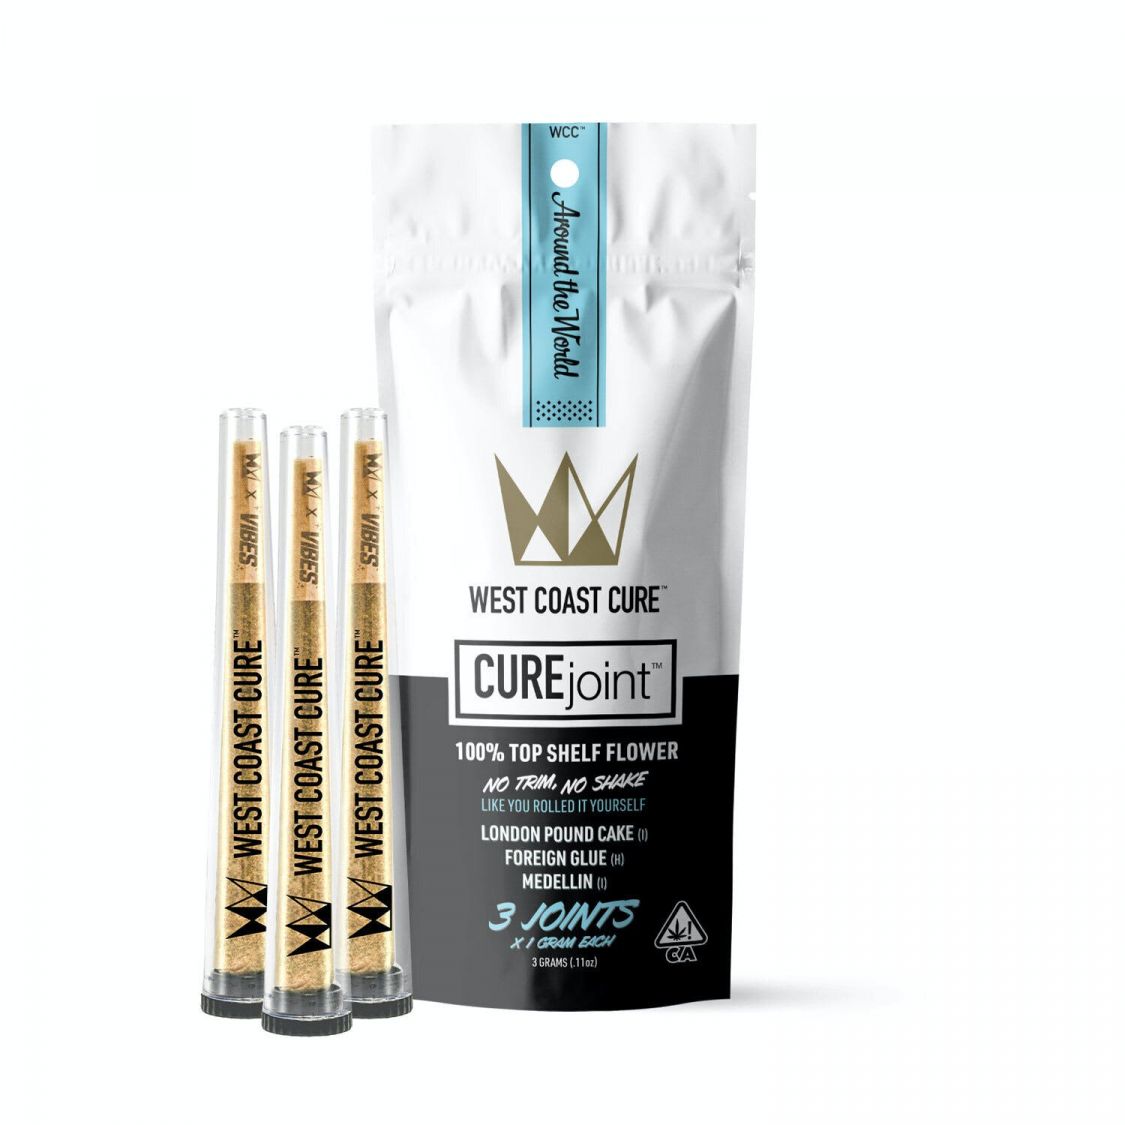 West Coast Cure Around The World Pack - CUREjoint Variety Pack 3 x 1G Pre-rolls Preroll